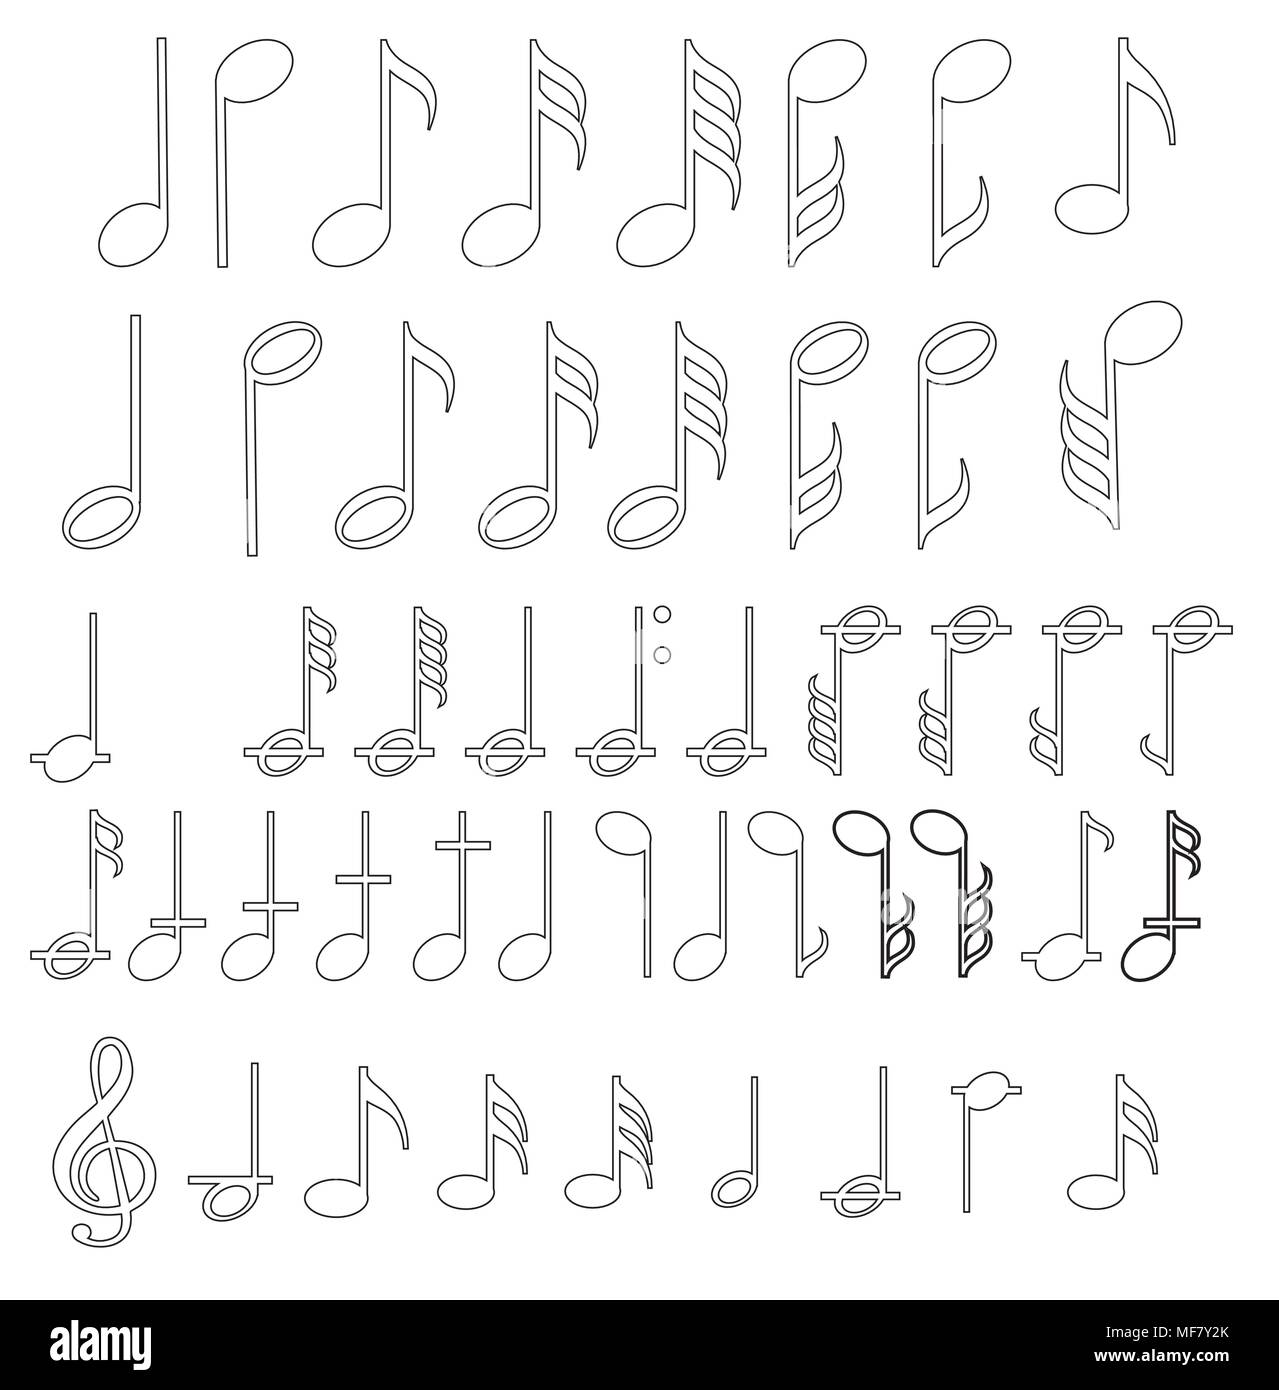 Music note background with different music symbols Stock Vector Image ...